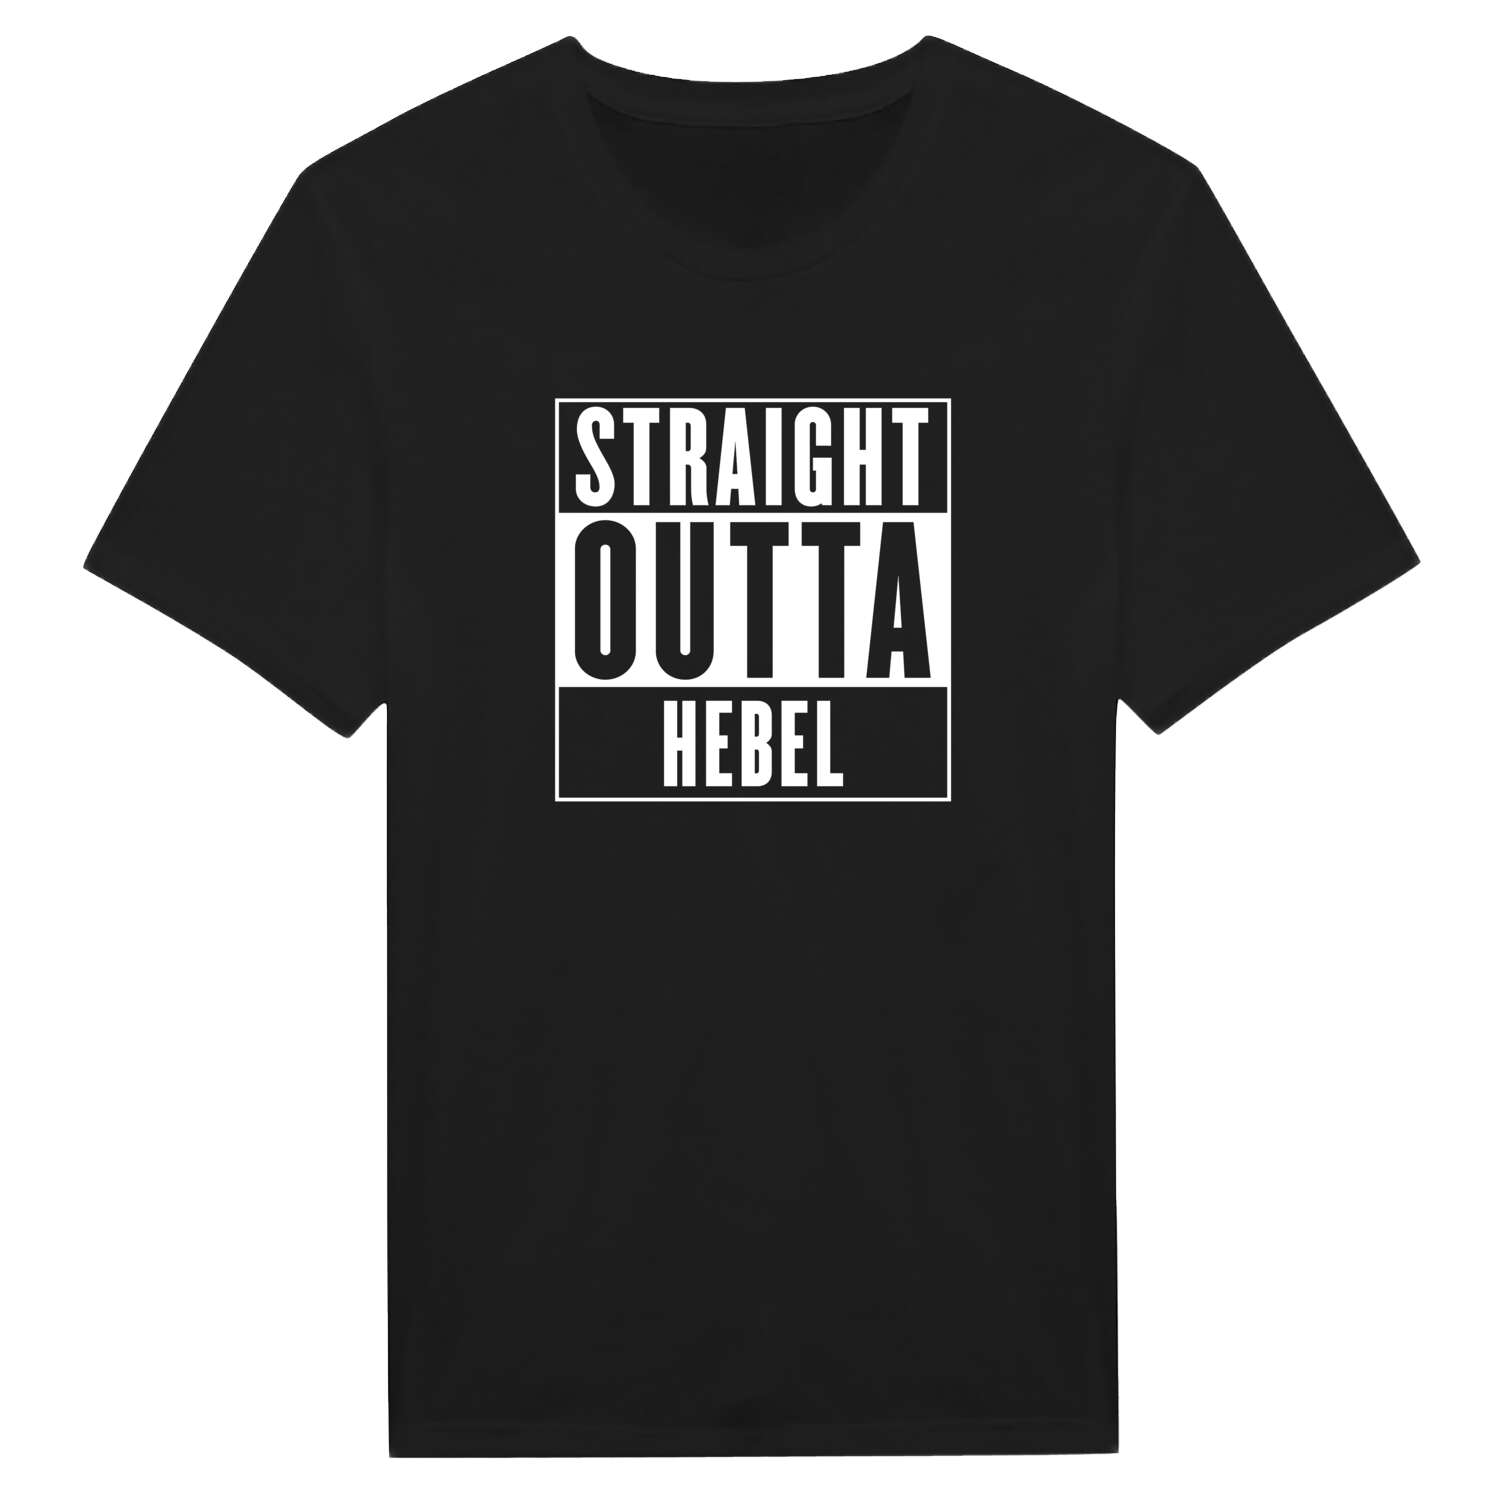 Hebel T-Shirt »Straight Outta«